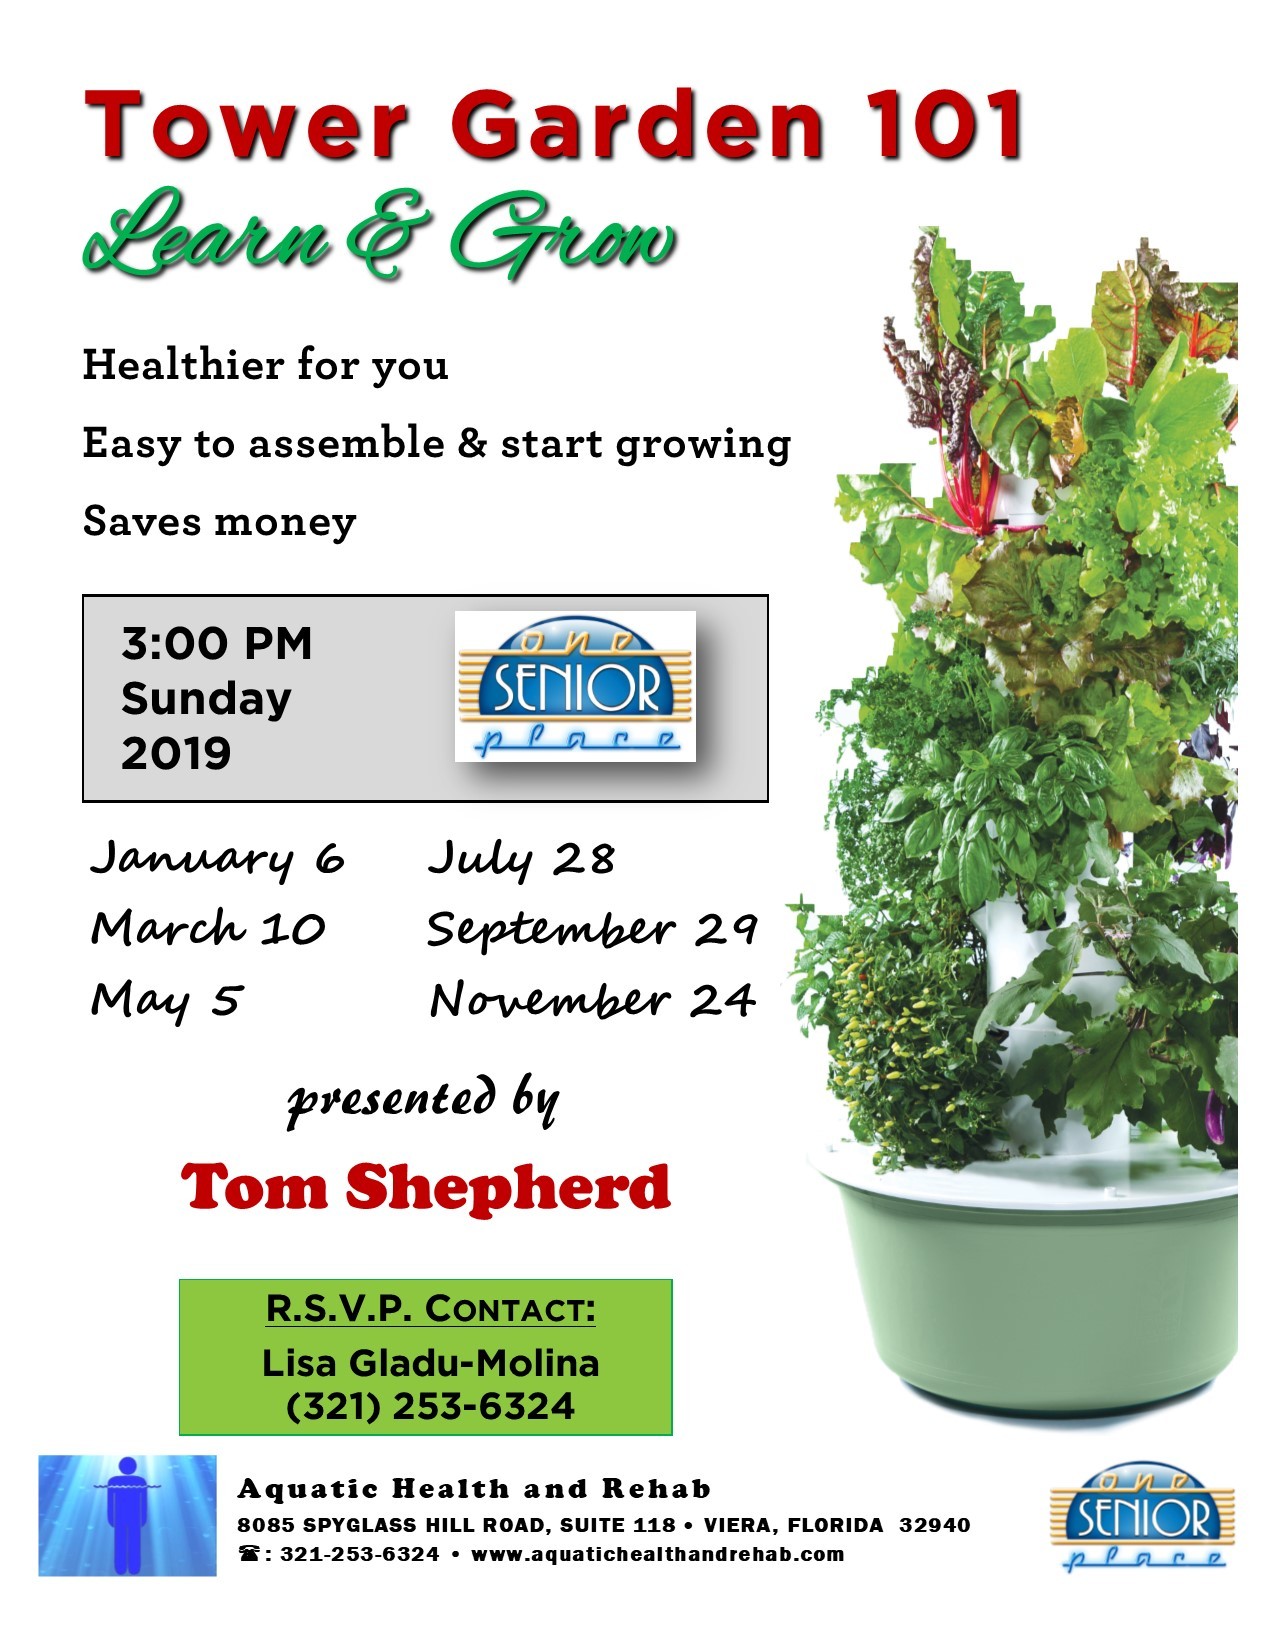 Tower Garden 101, Learn and Grow, presented by Aquatic Health and Rehab